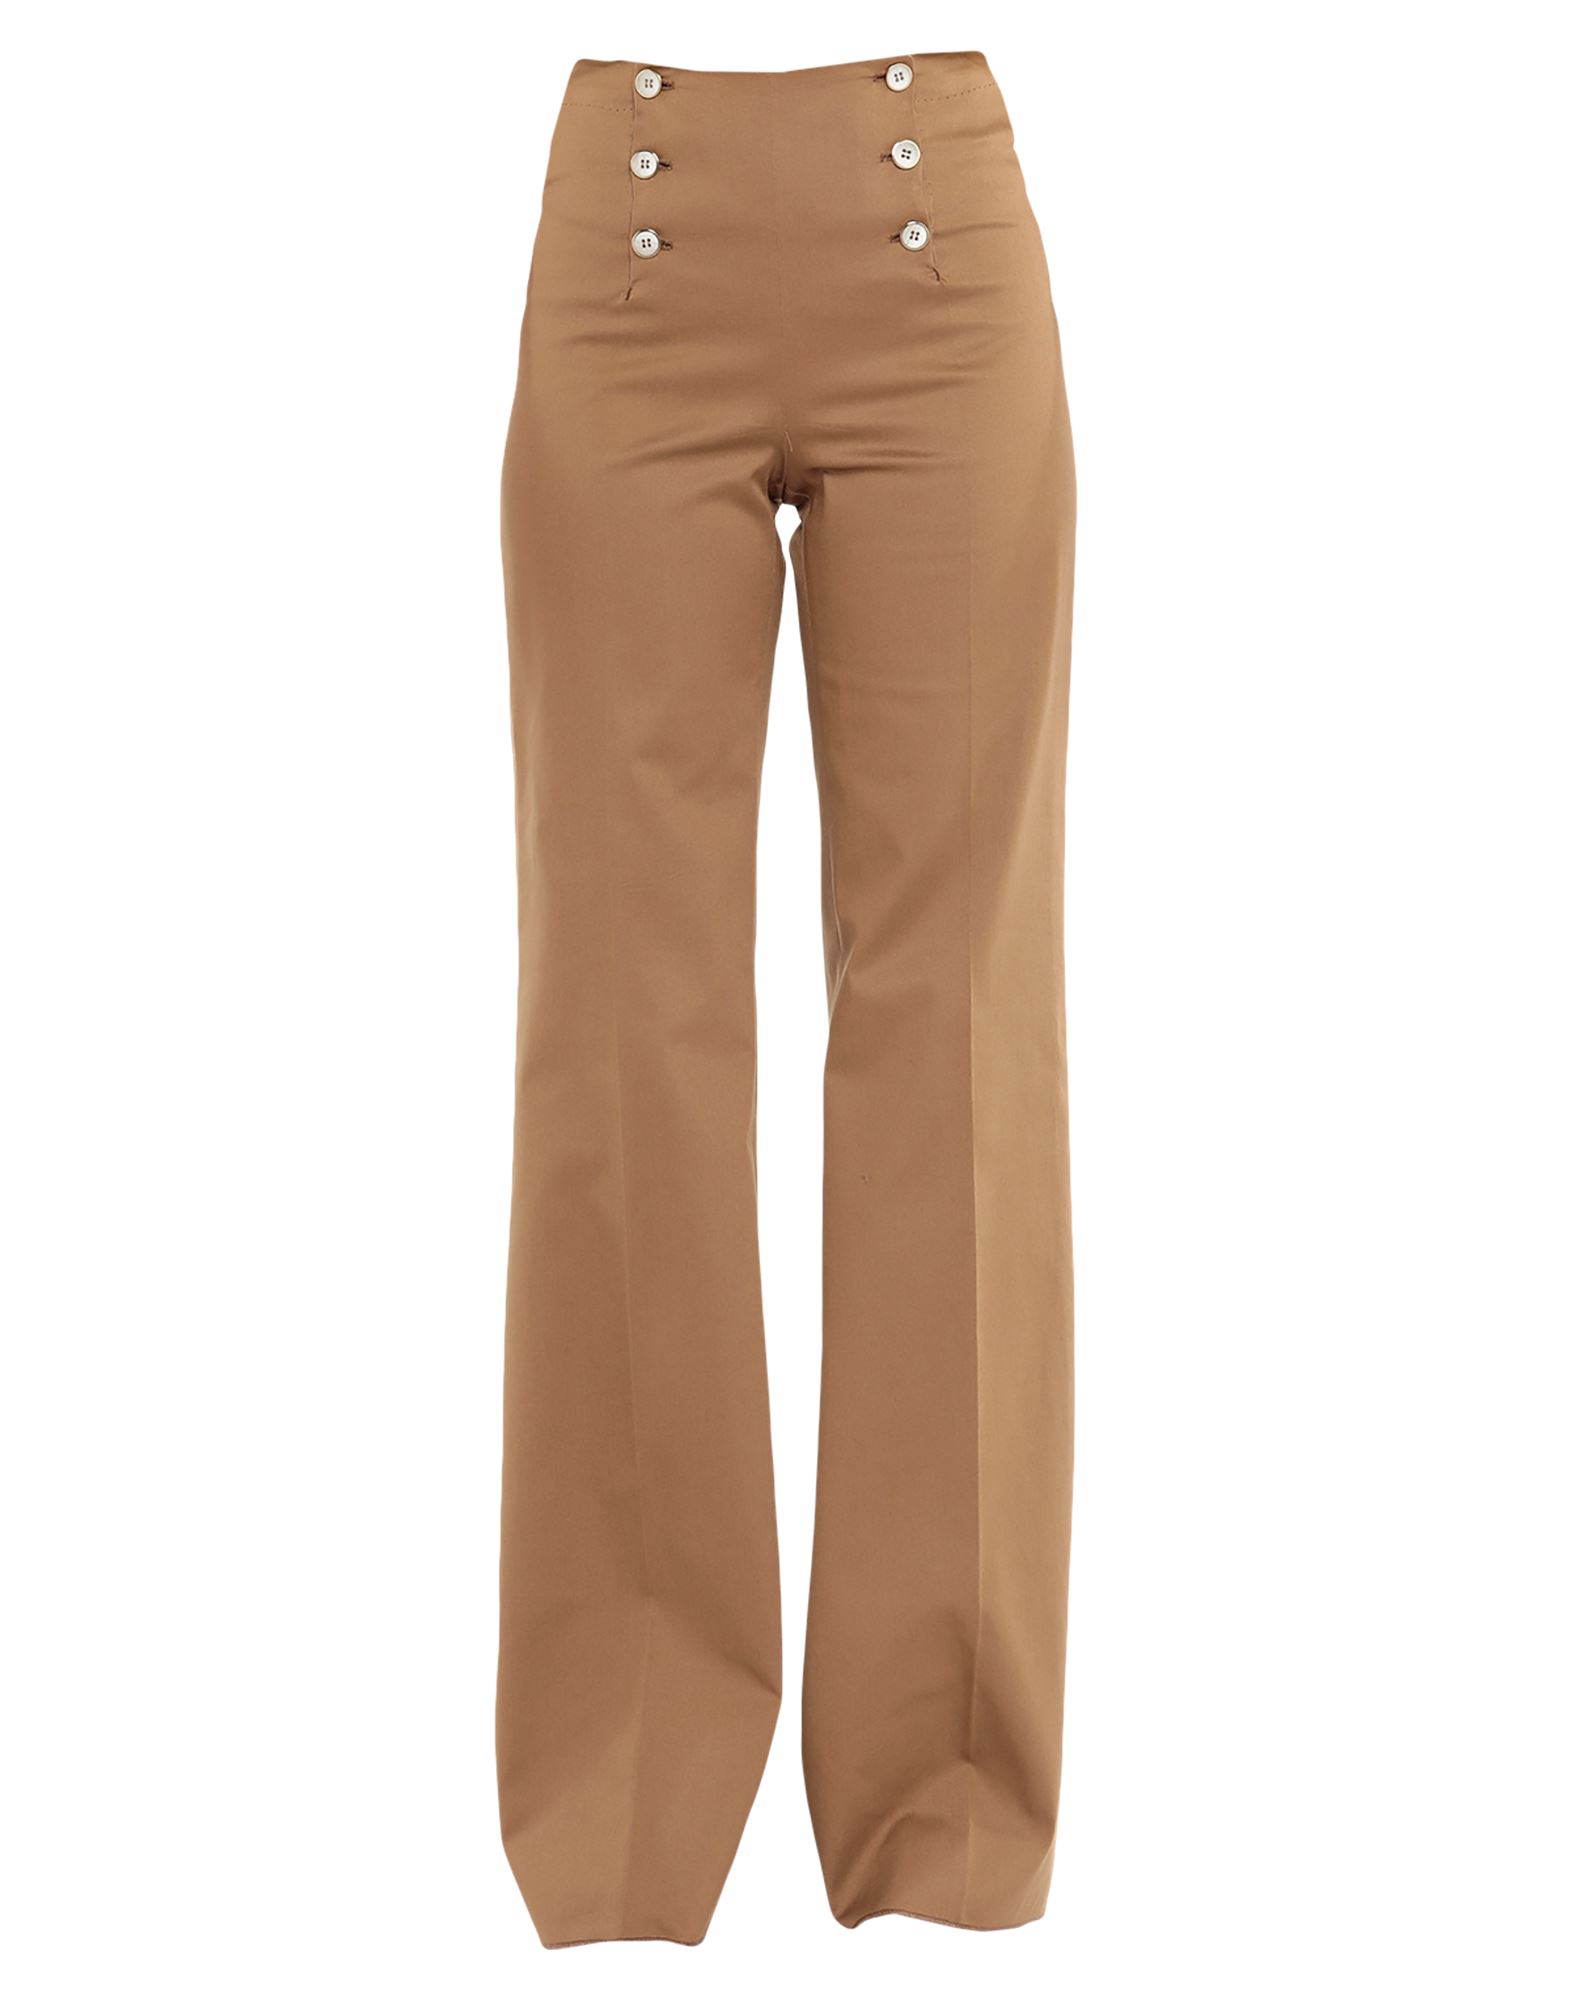 GIULIVA HERITAGE COLLECTION Cropped Pants